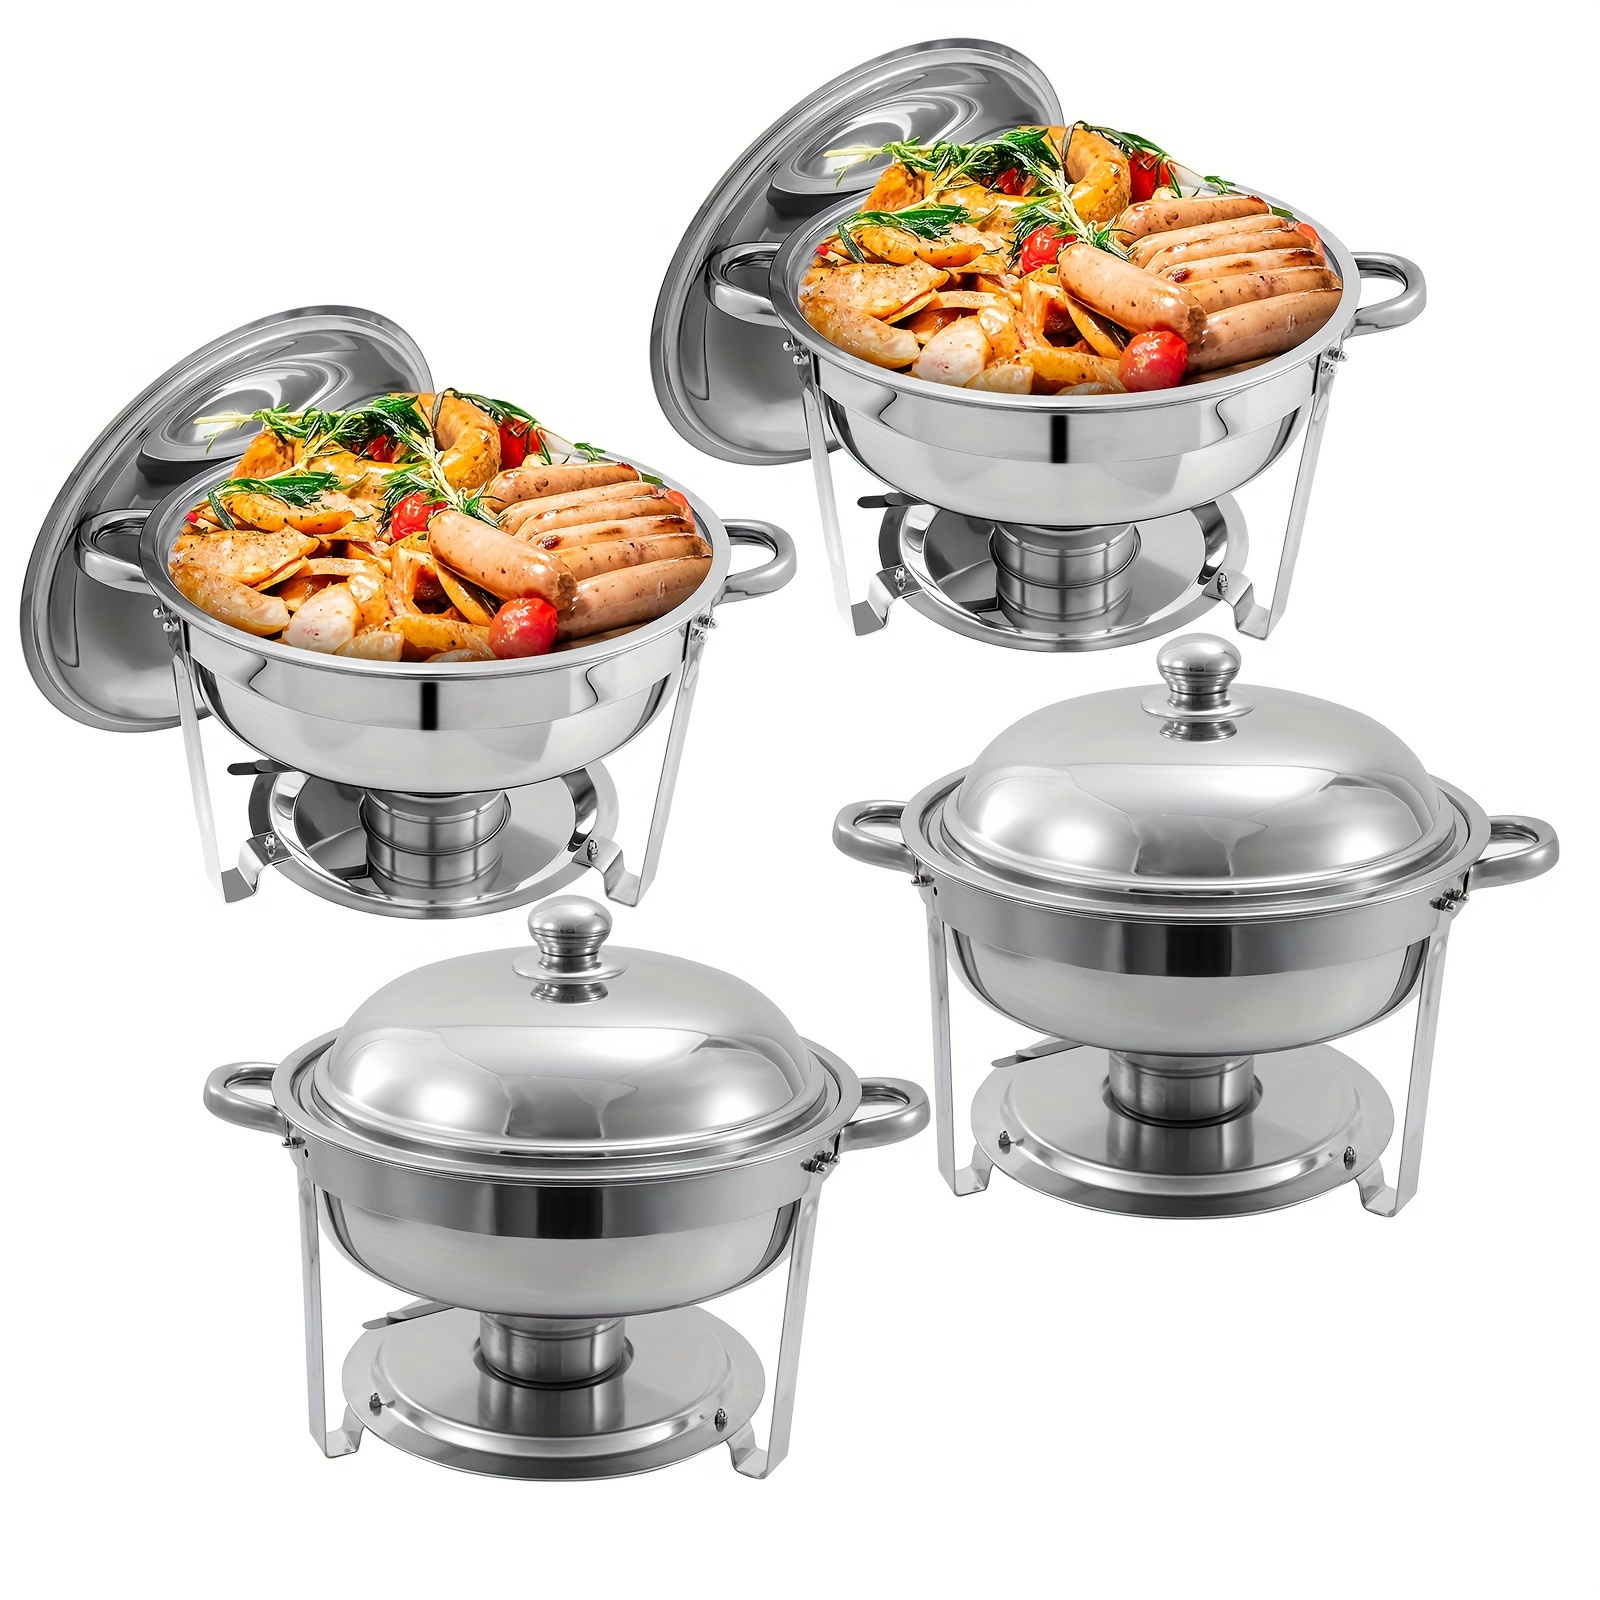 

6 Qt Chafing Dish Buffet Set, Stainless Steel Round Deep Pans Chafers Buffet Servers And Warmers Sets With Food And Water Trays For Dinner, Parties, Wedding, Camping